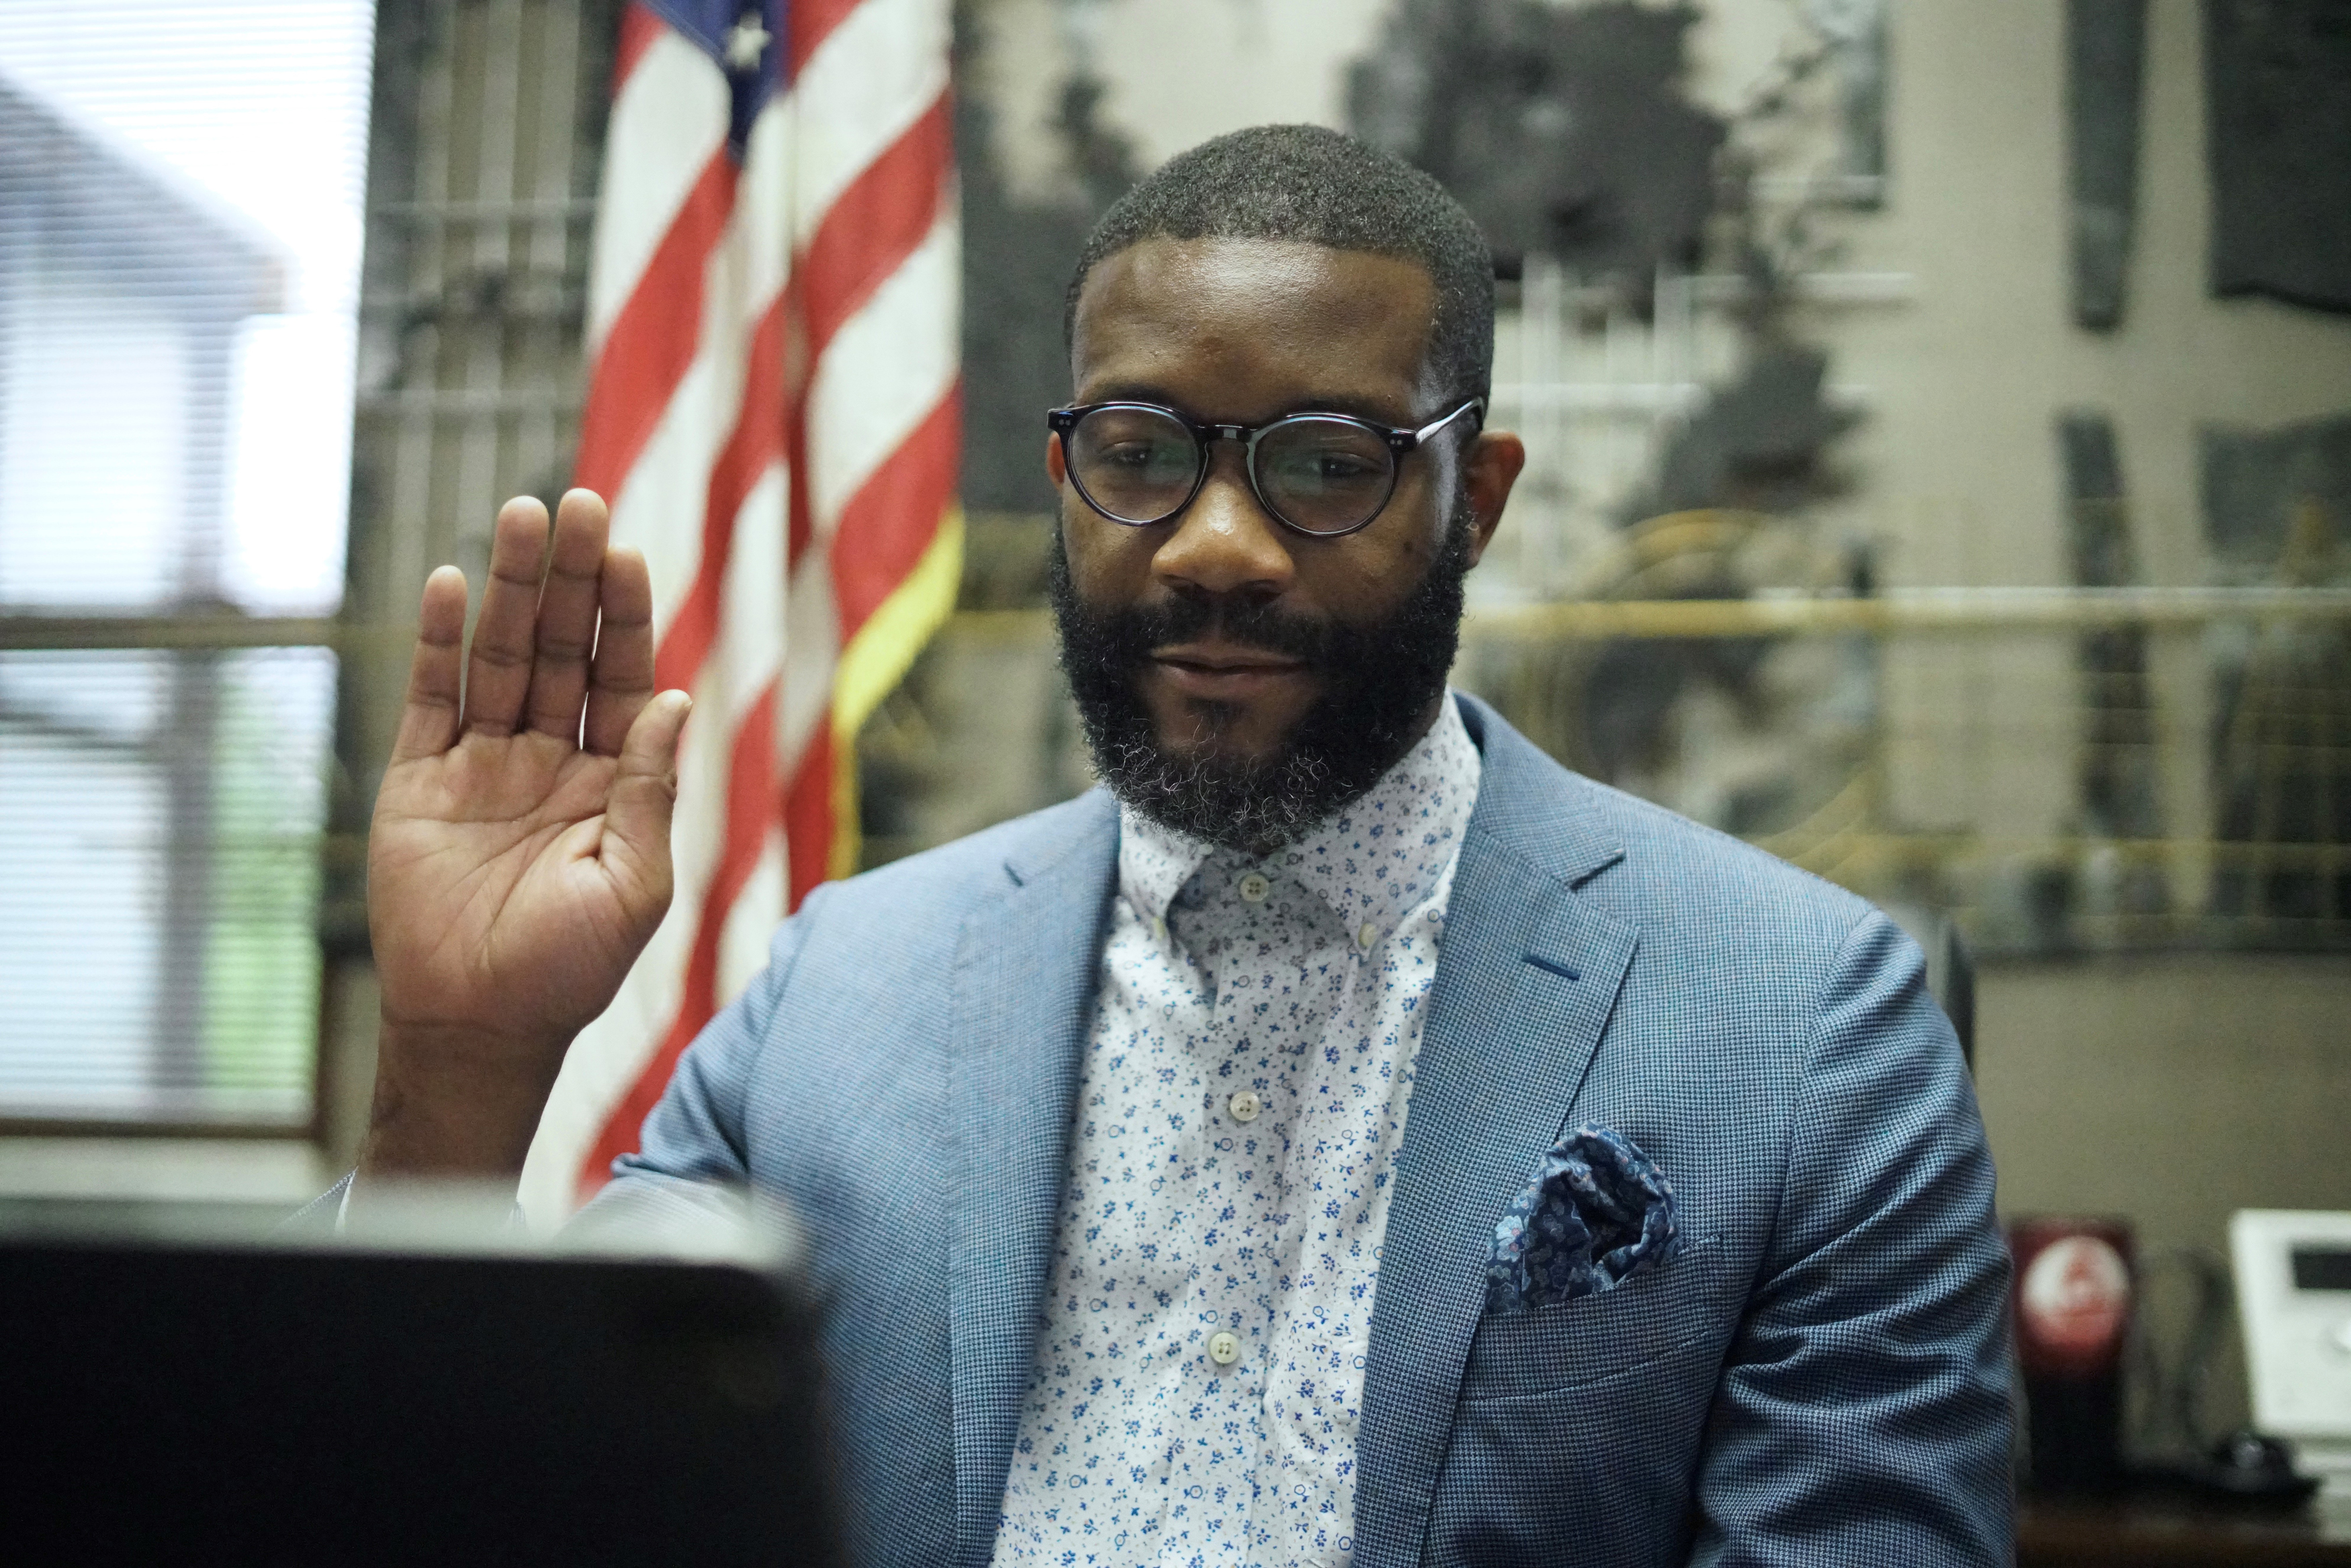 Mayor Randall Woodfin during the swearing-in ceremony